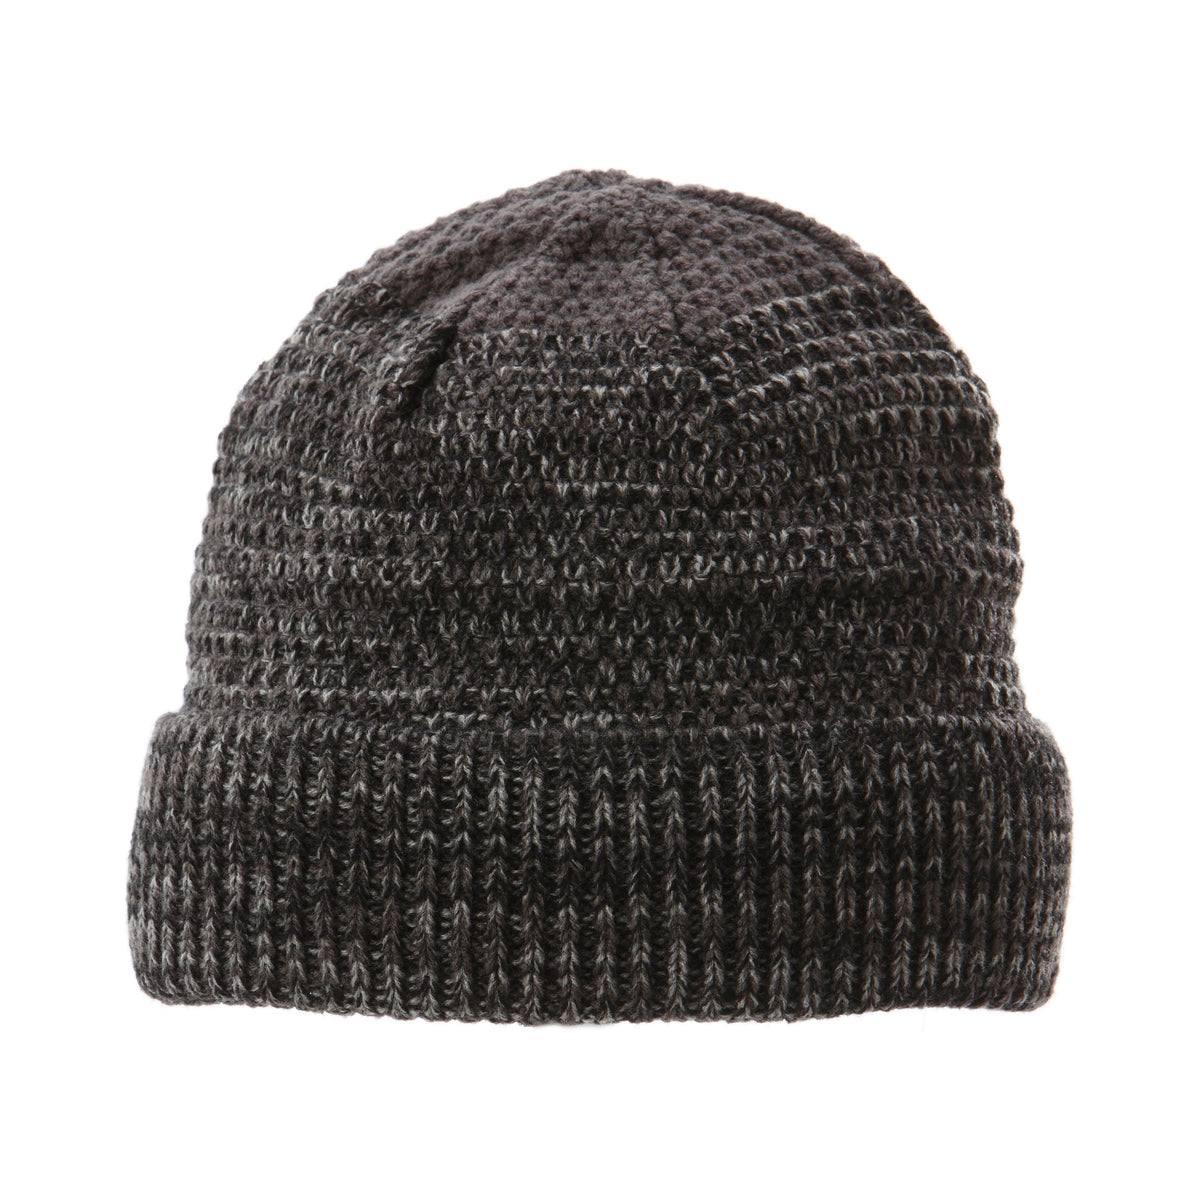 comfy A use Screamer super Gear long-lasting Graham - beanie made – for